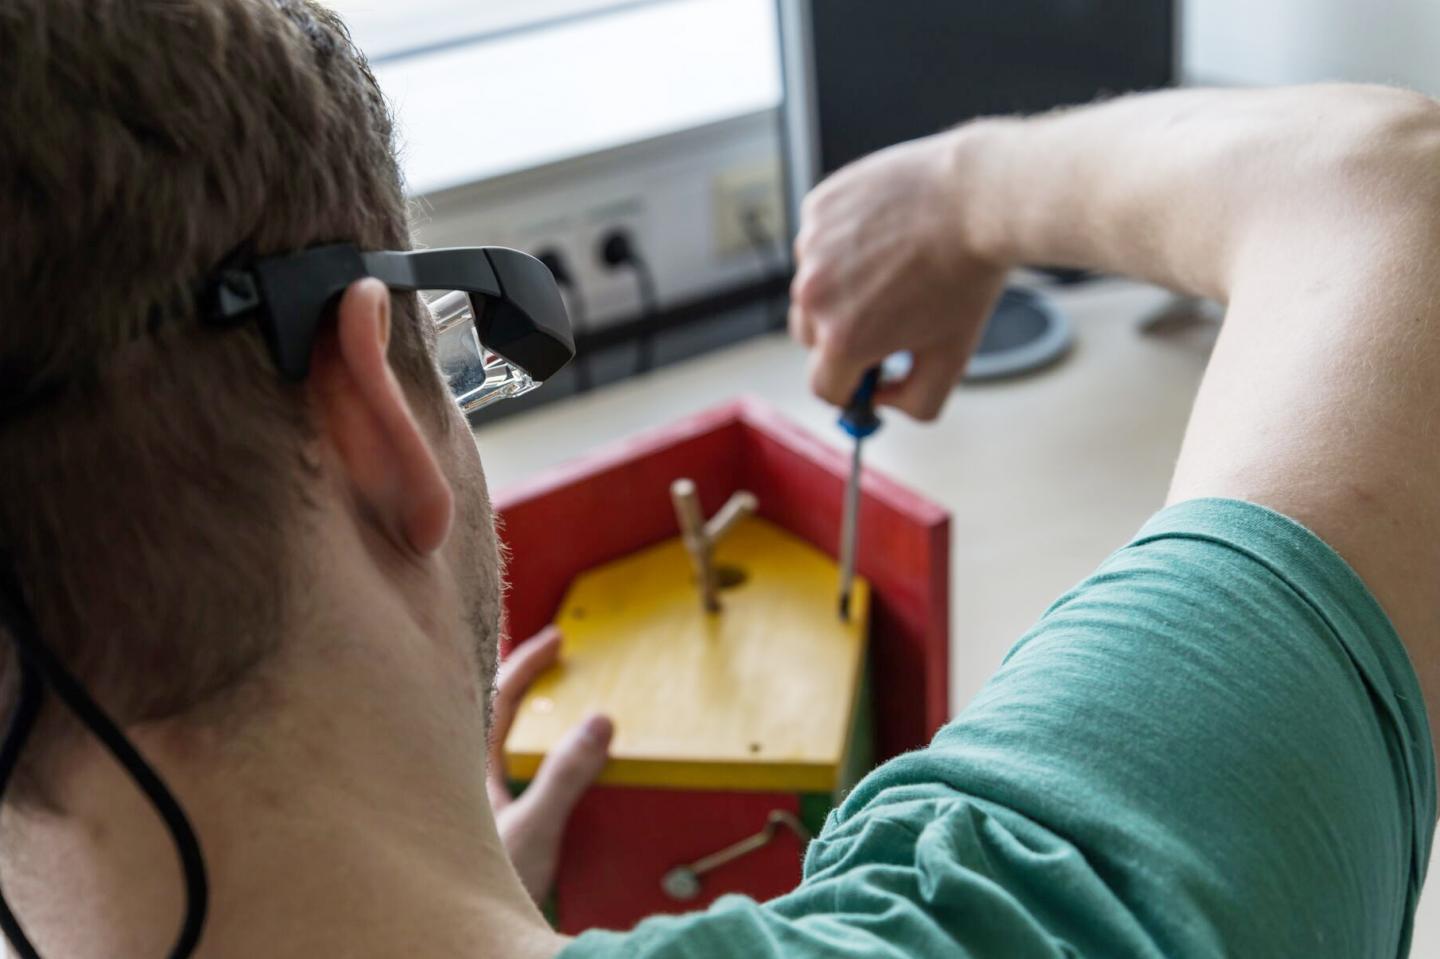 The precursor model to the Avikom glasses can, for example, help workers assemble wooden bird houses. Courtesy of CITEC/Bielefeld University.